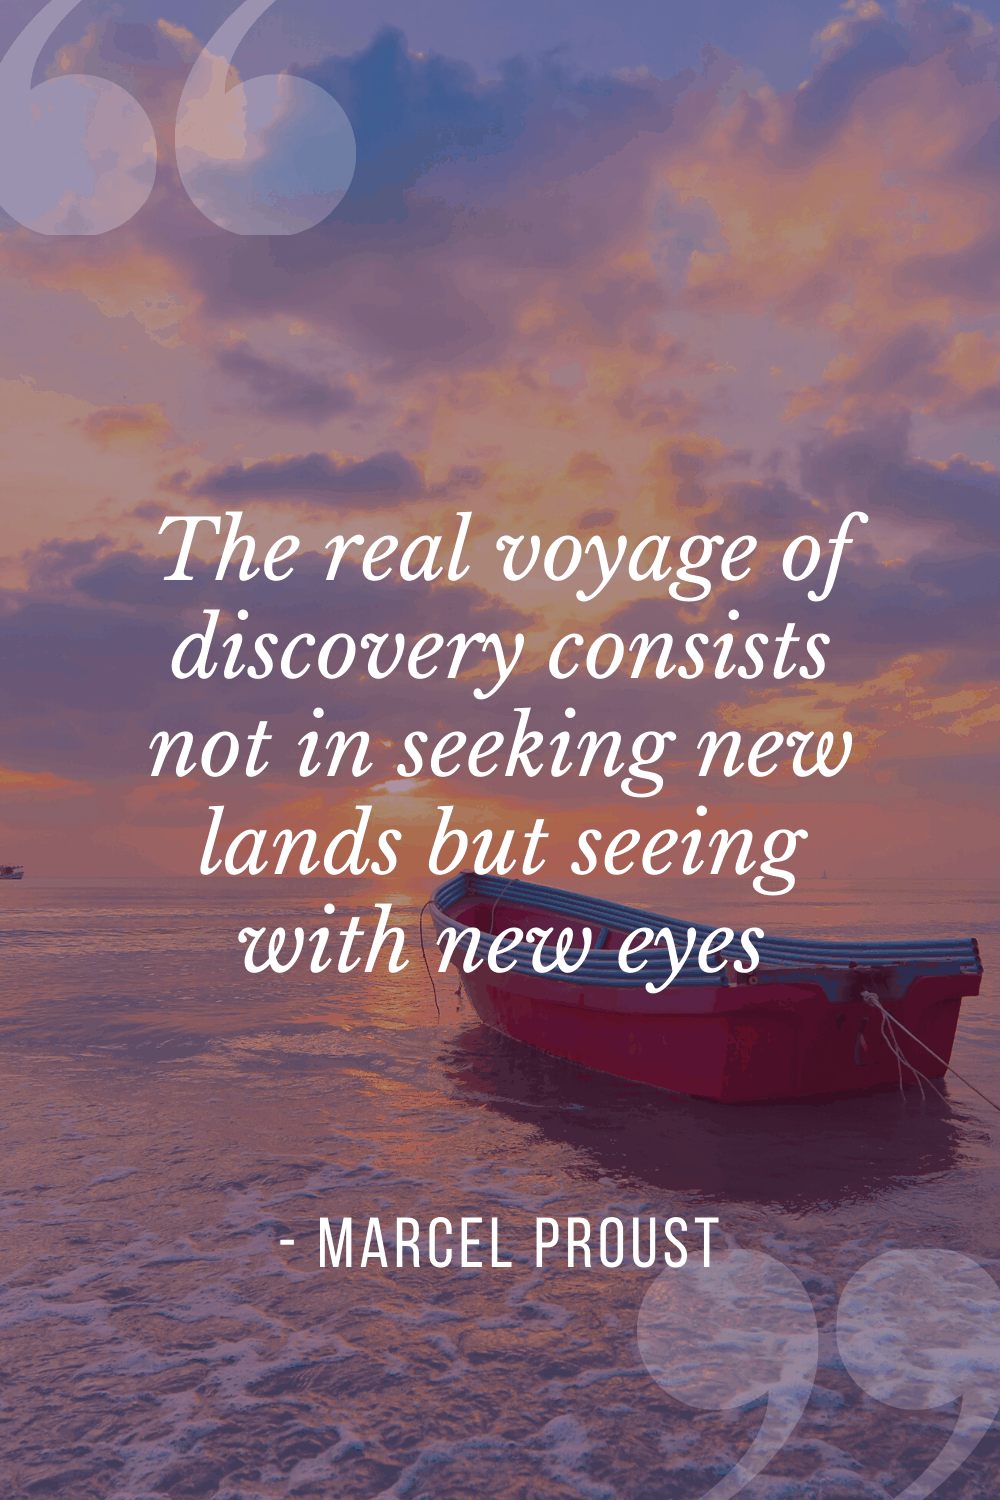 The real voyage of discovery consists not in seeking new lands but seeing with new eyes, Marcel Proust